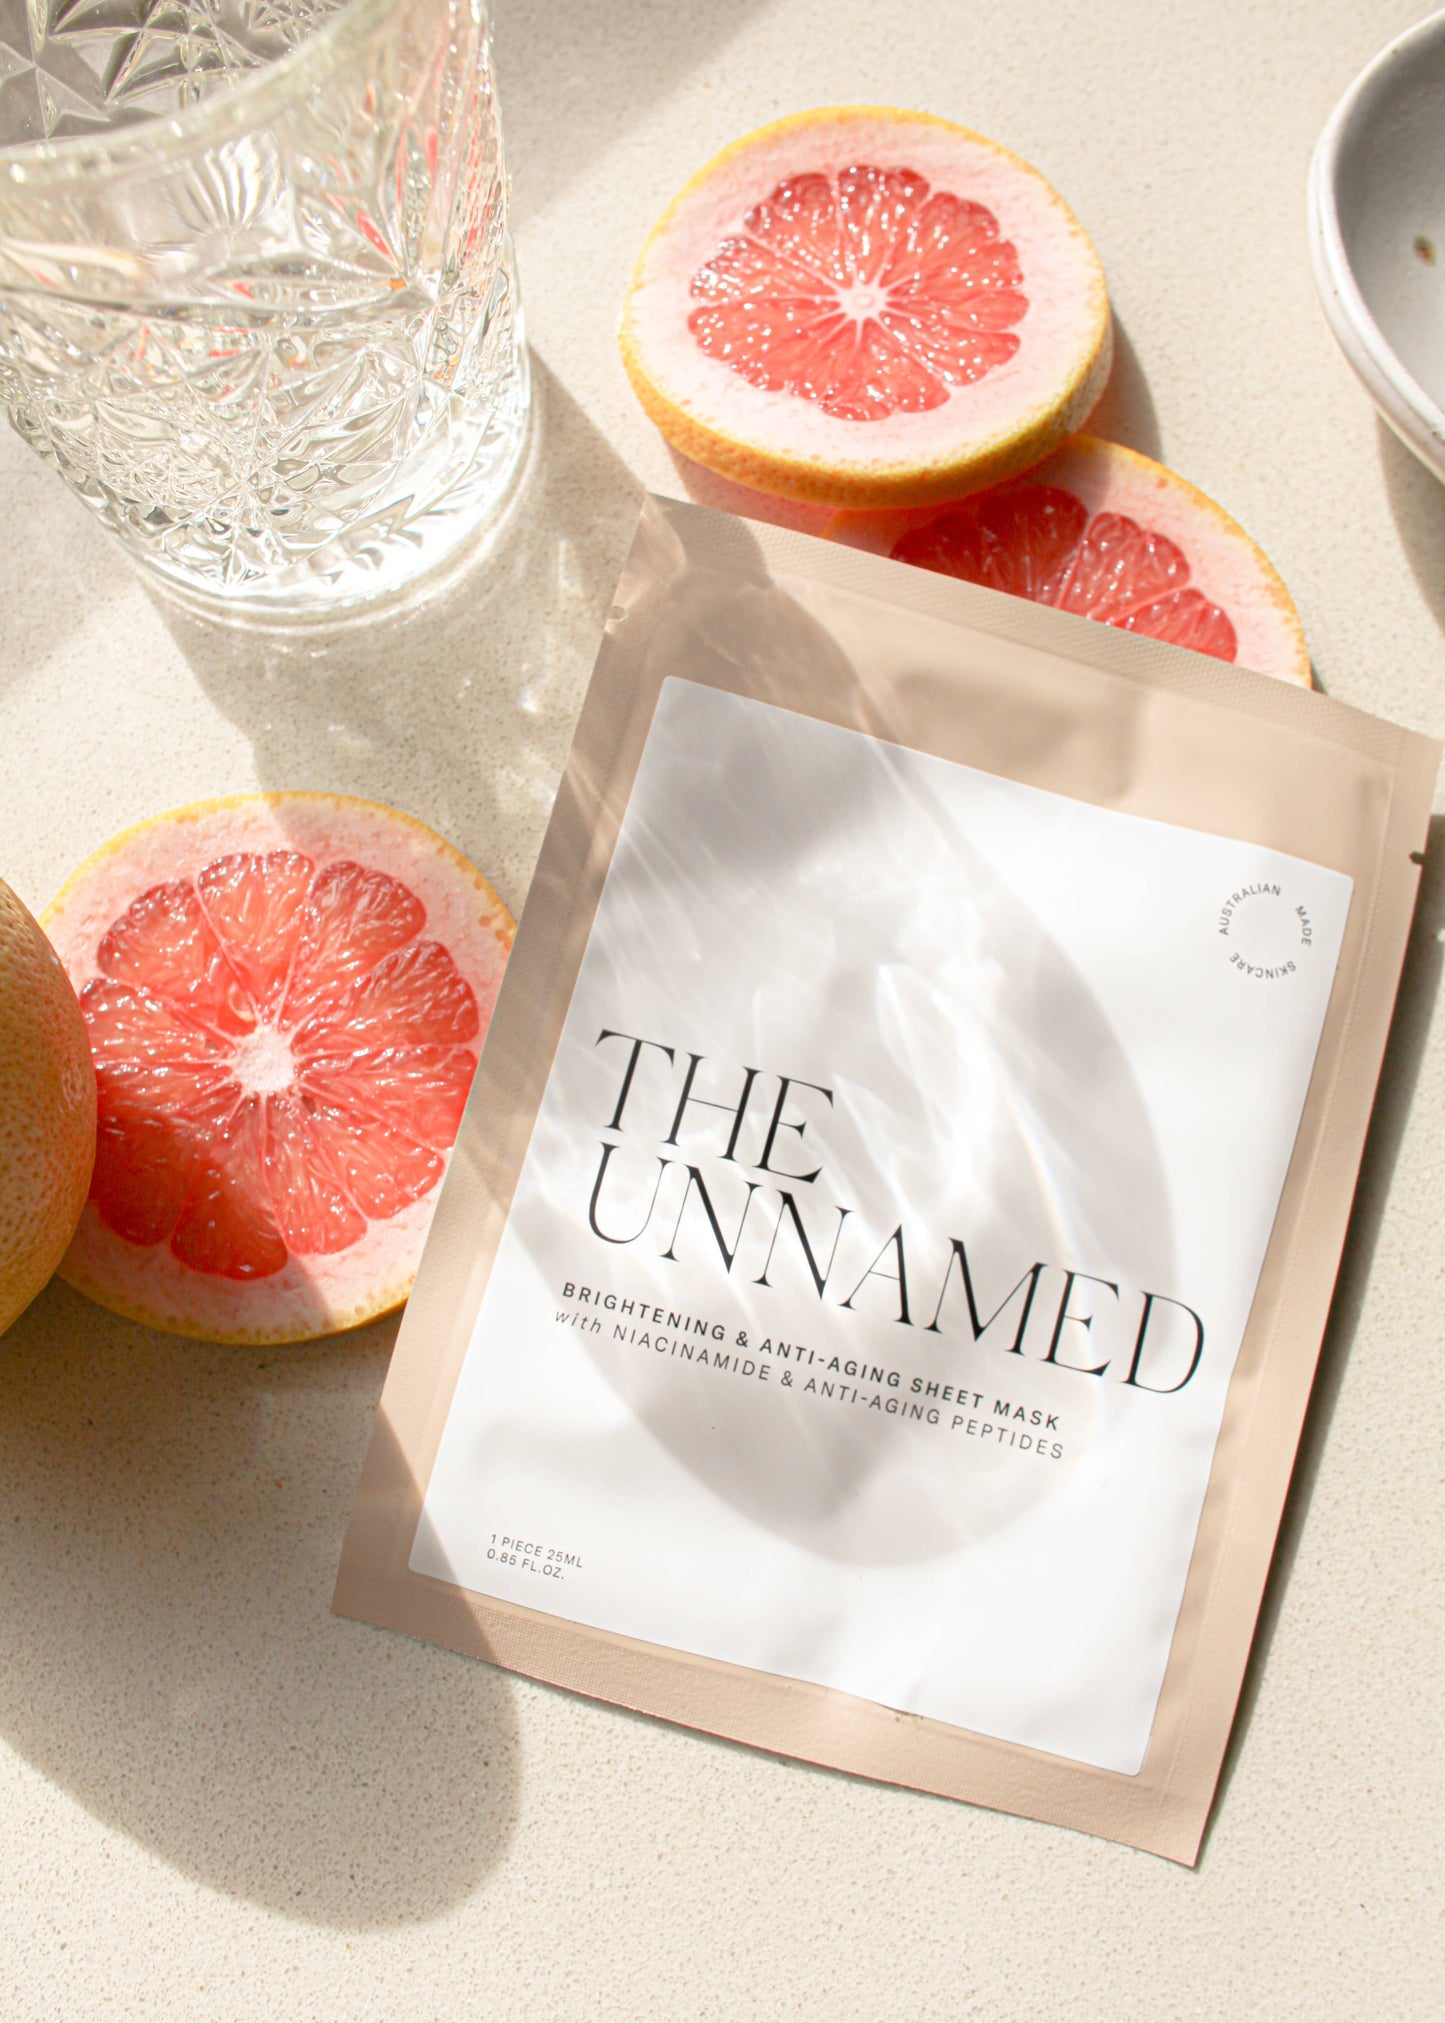 The Unnamed - Brightenting & Anti-Aging Sheet Mask